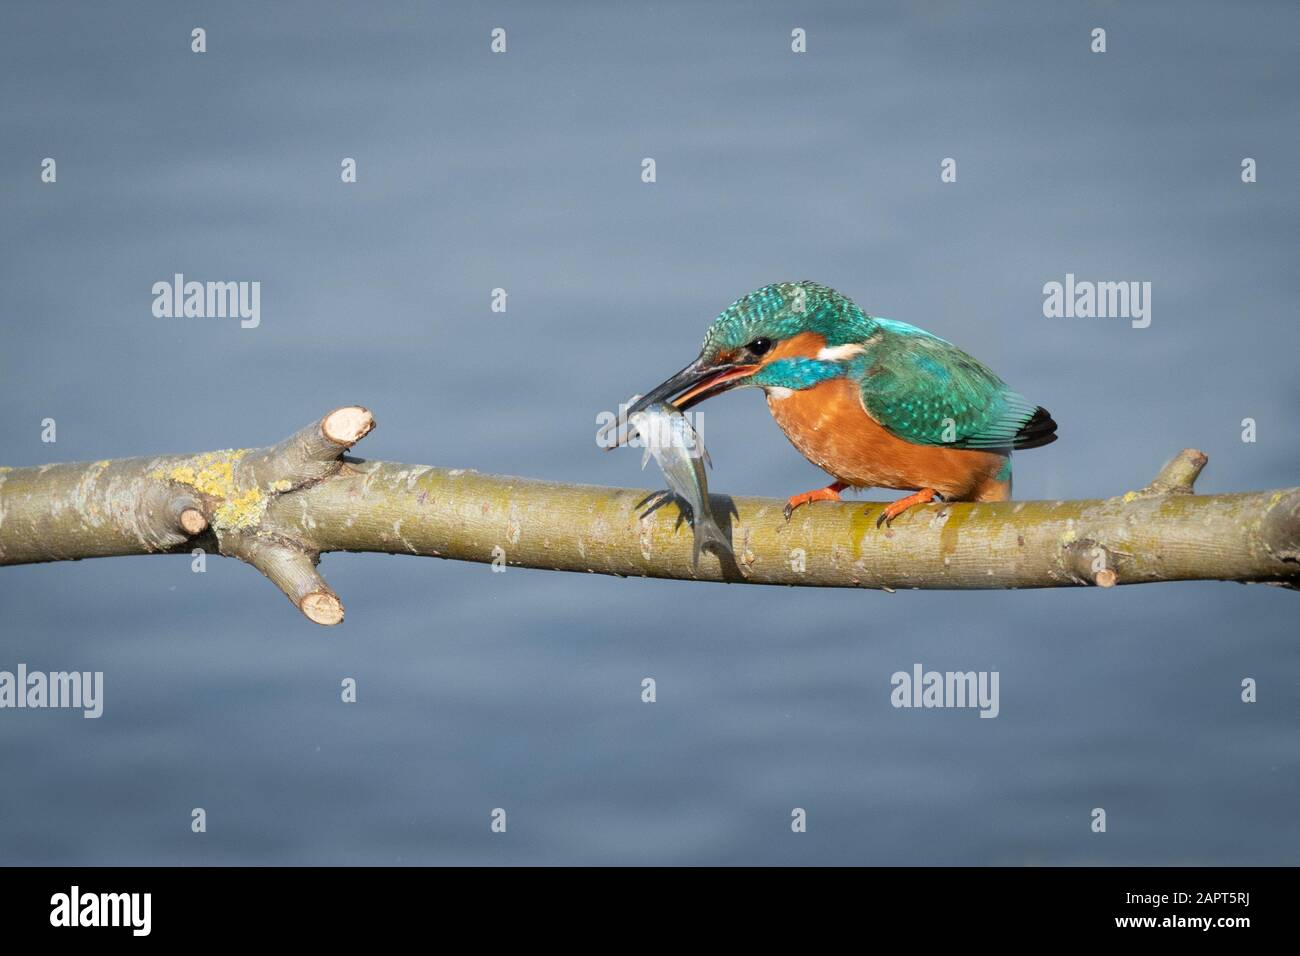 A male kingfisher, alcedo atthis, perched on a branch above water with a fish in its beak after a successful dive Stock Photo